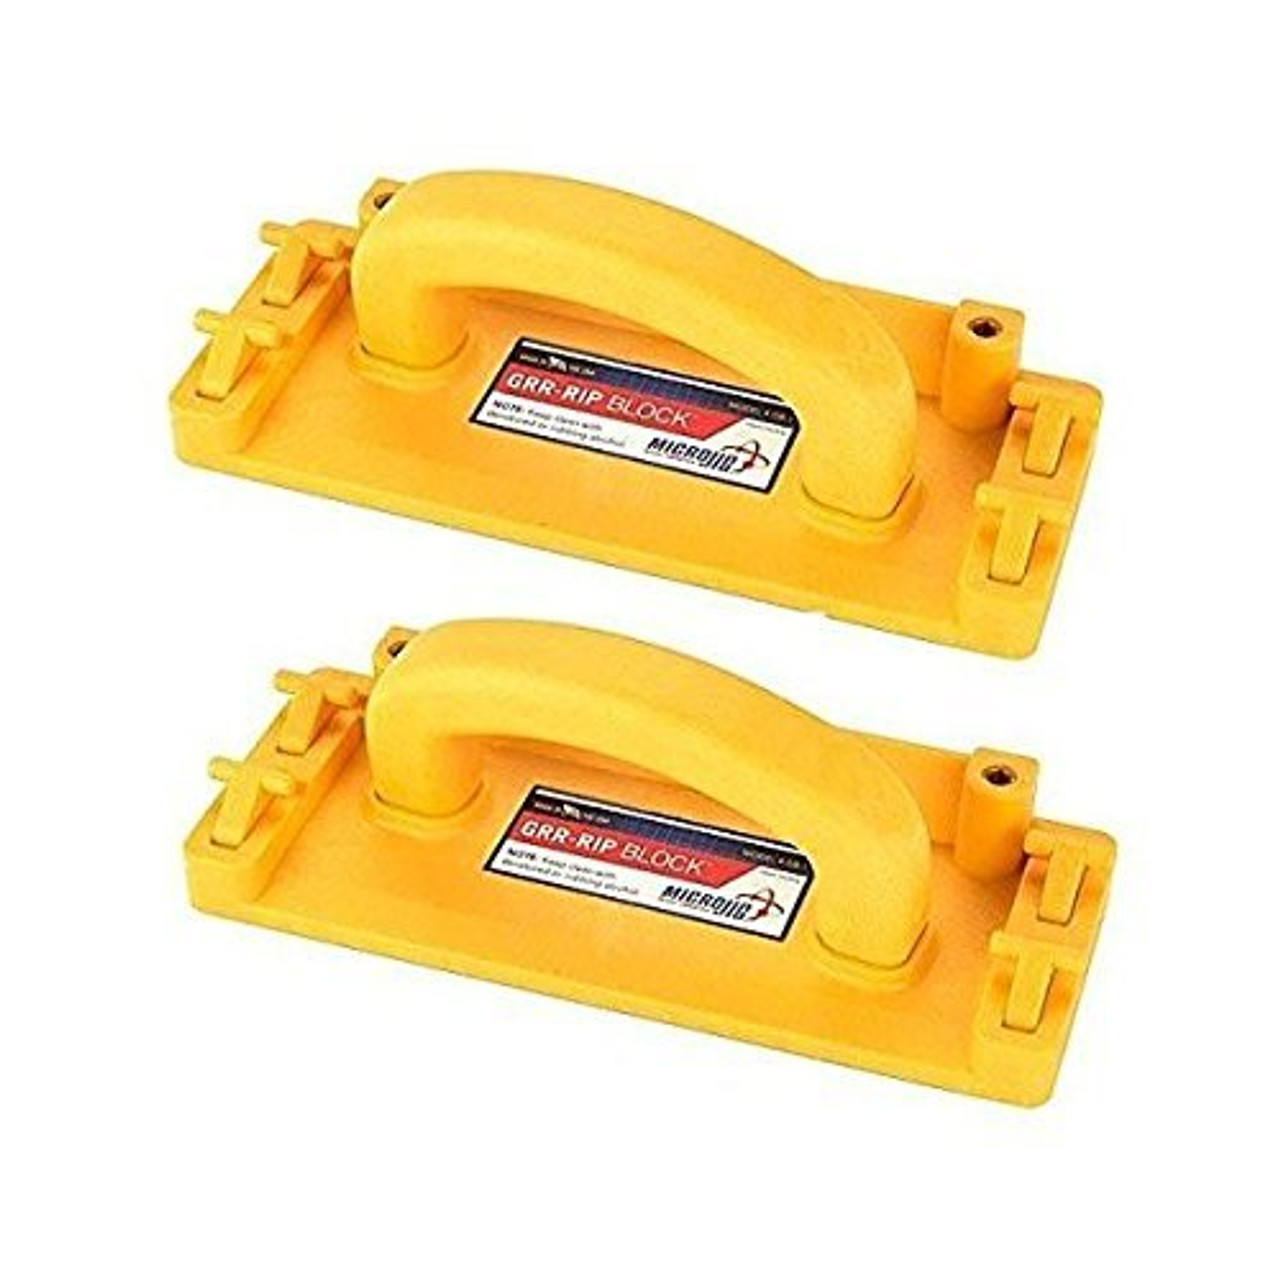 Micro Jig GB-1 GRR-Rip Block Smart Pushblock for Workshop Safety - 2-Pack